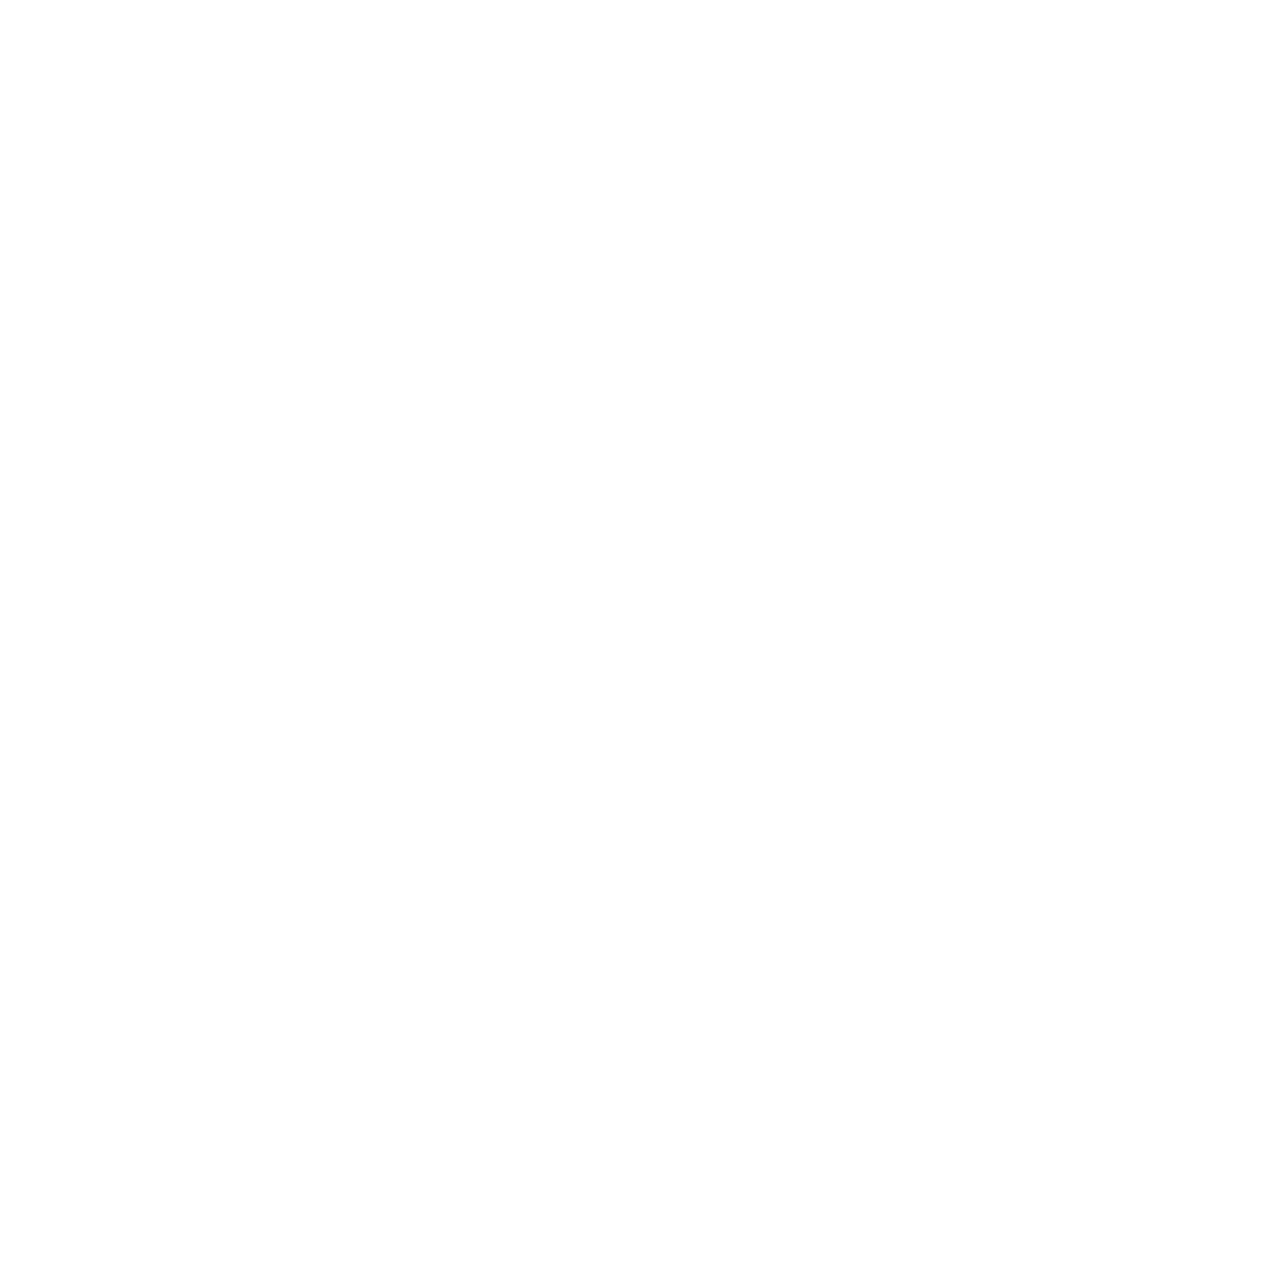 Autodesk.png